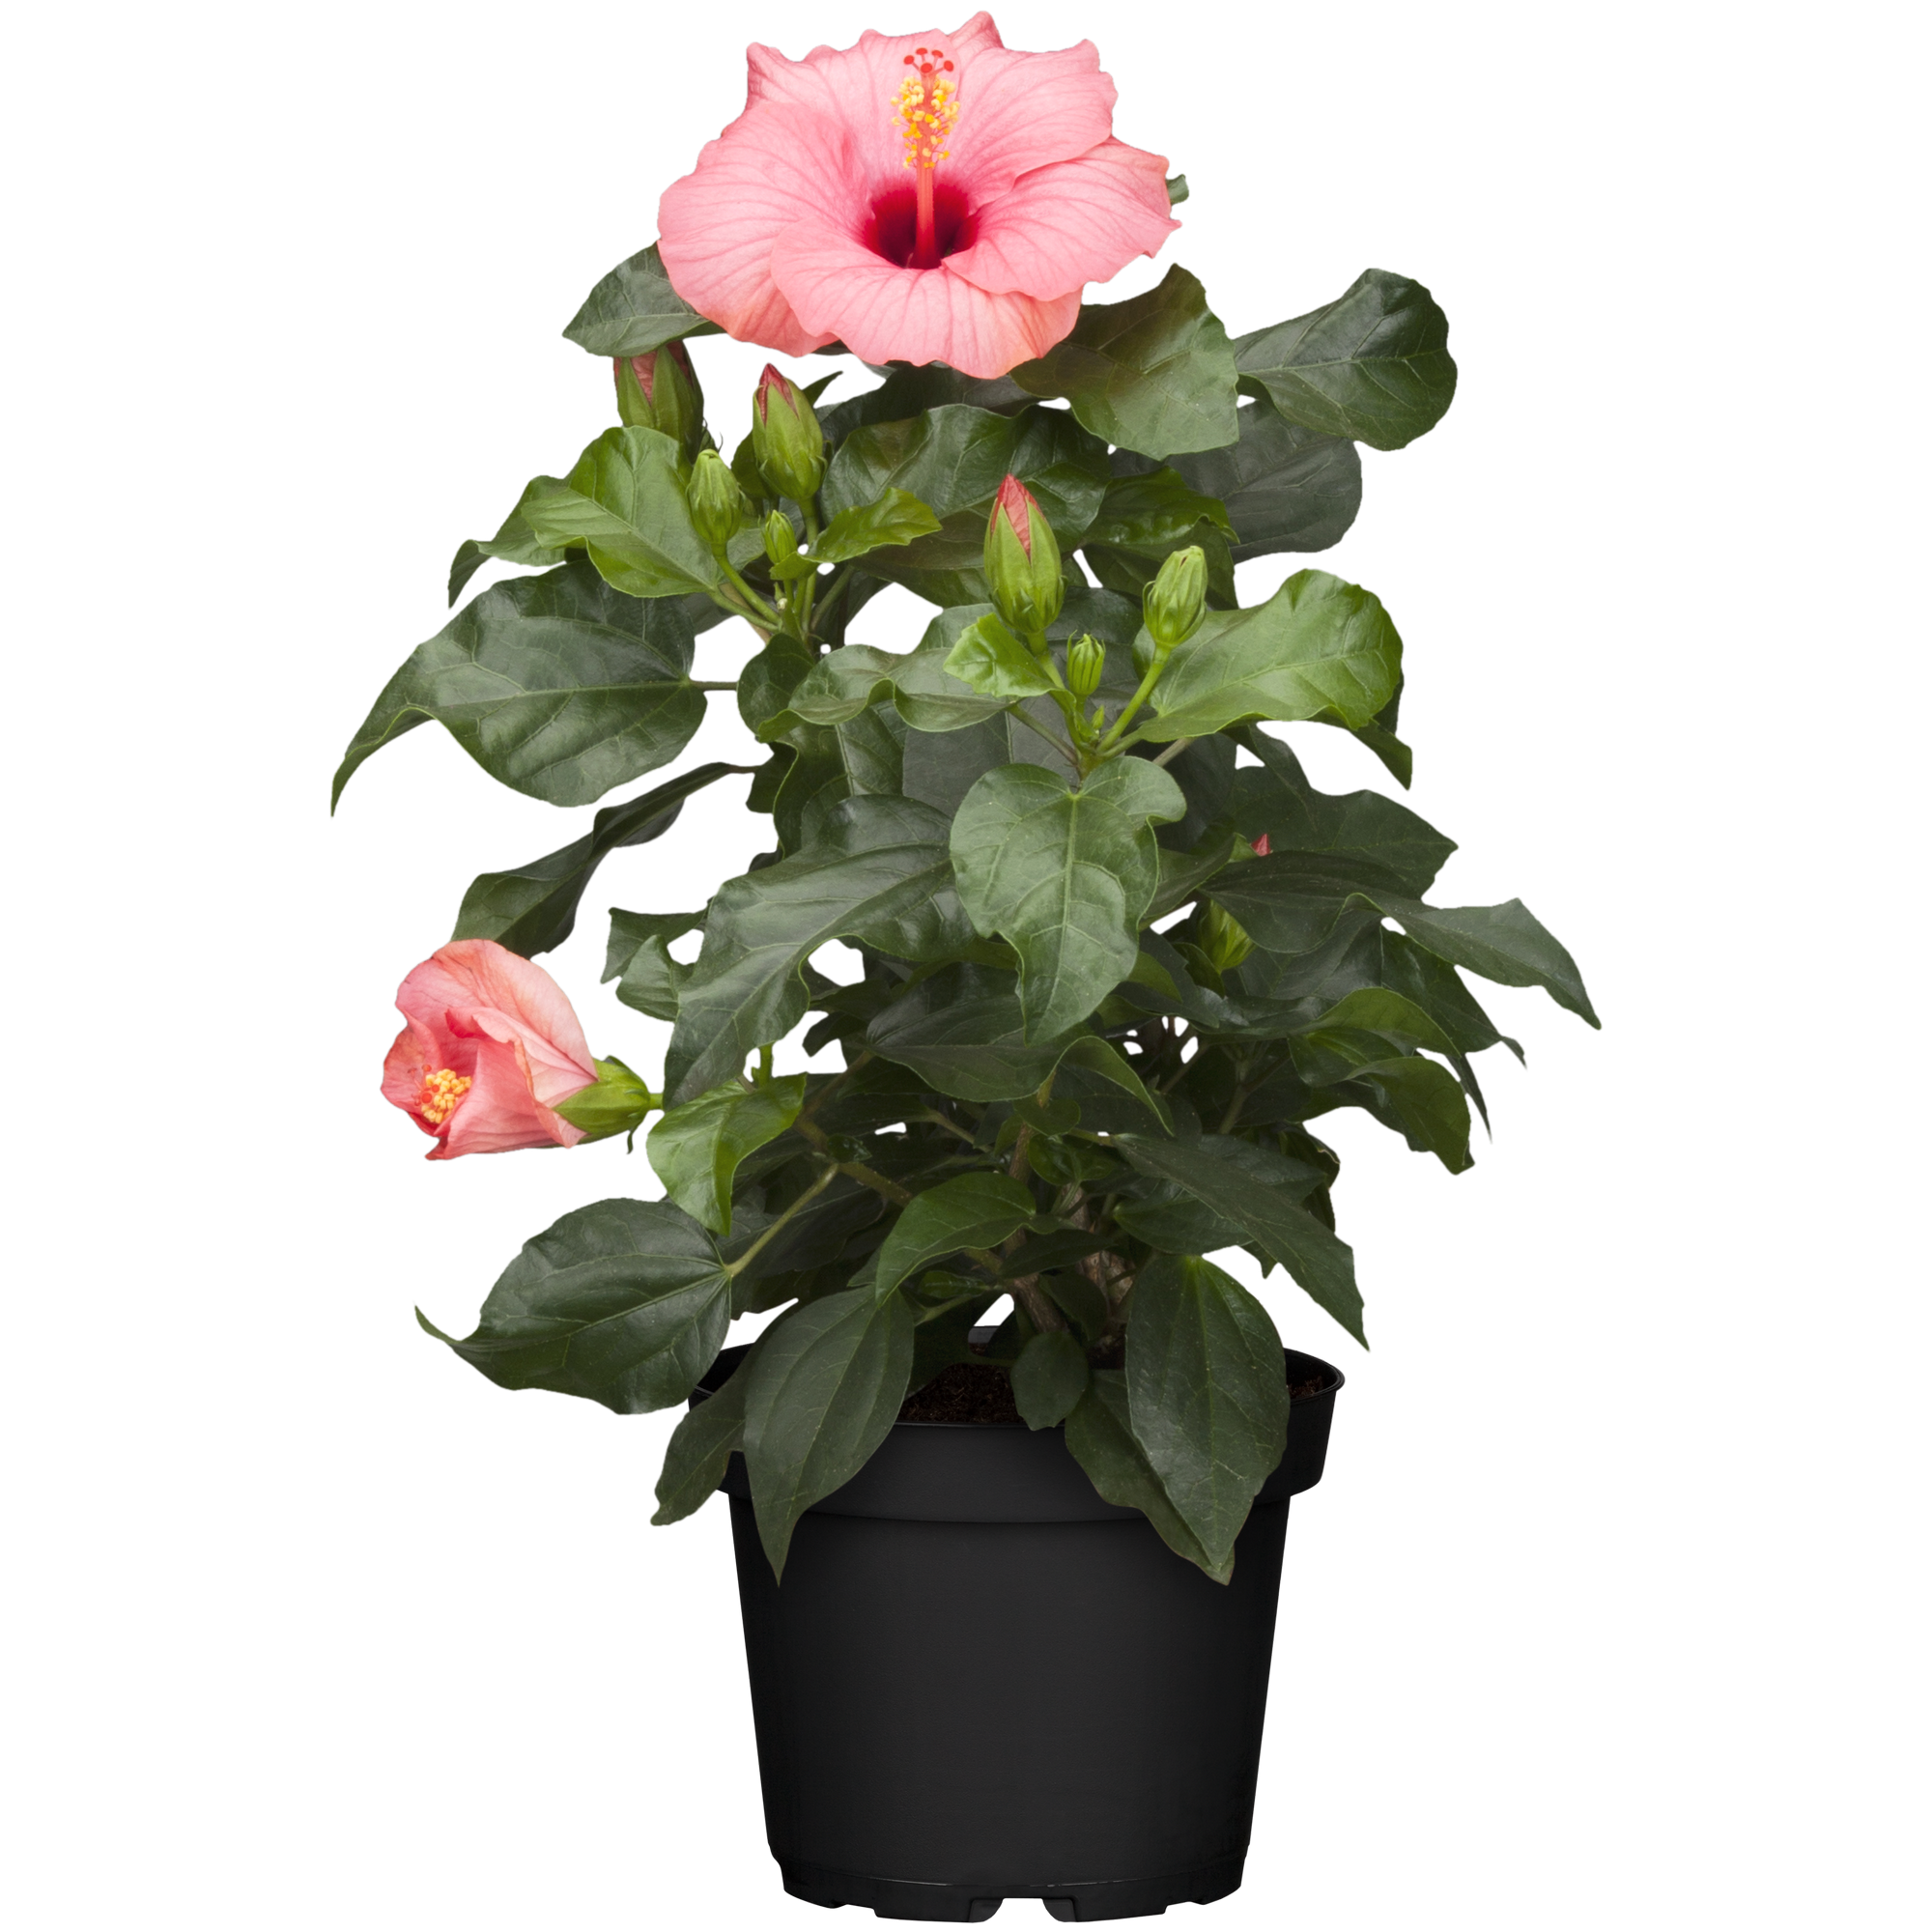 Zimmer-Hibiskus 'Long Life' rosa, 13 cm Topf + product picture